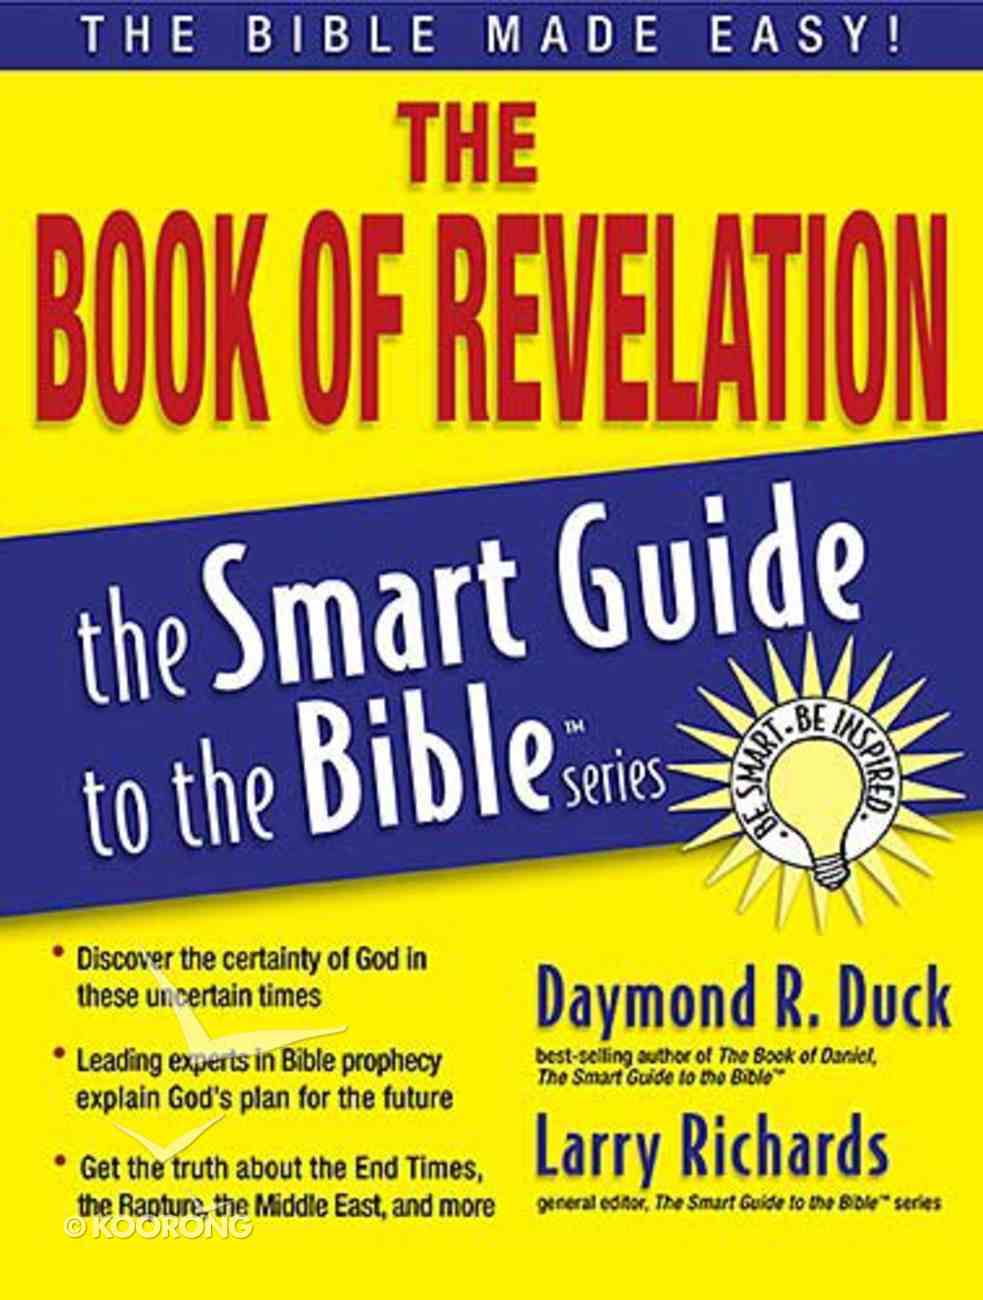 The Book of Revelation (Smart Guide To The Bible Series) Paperback